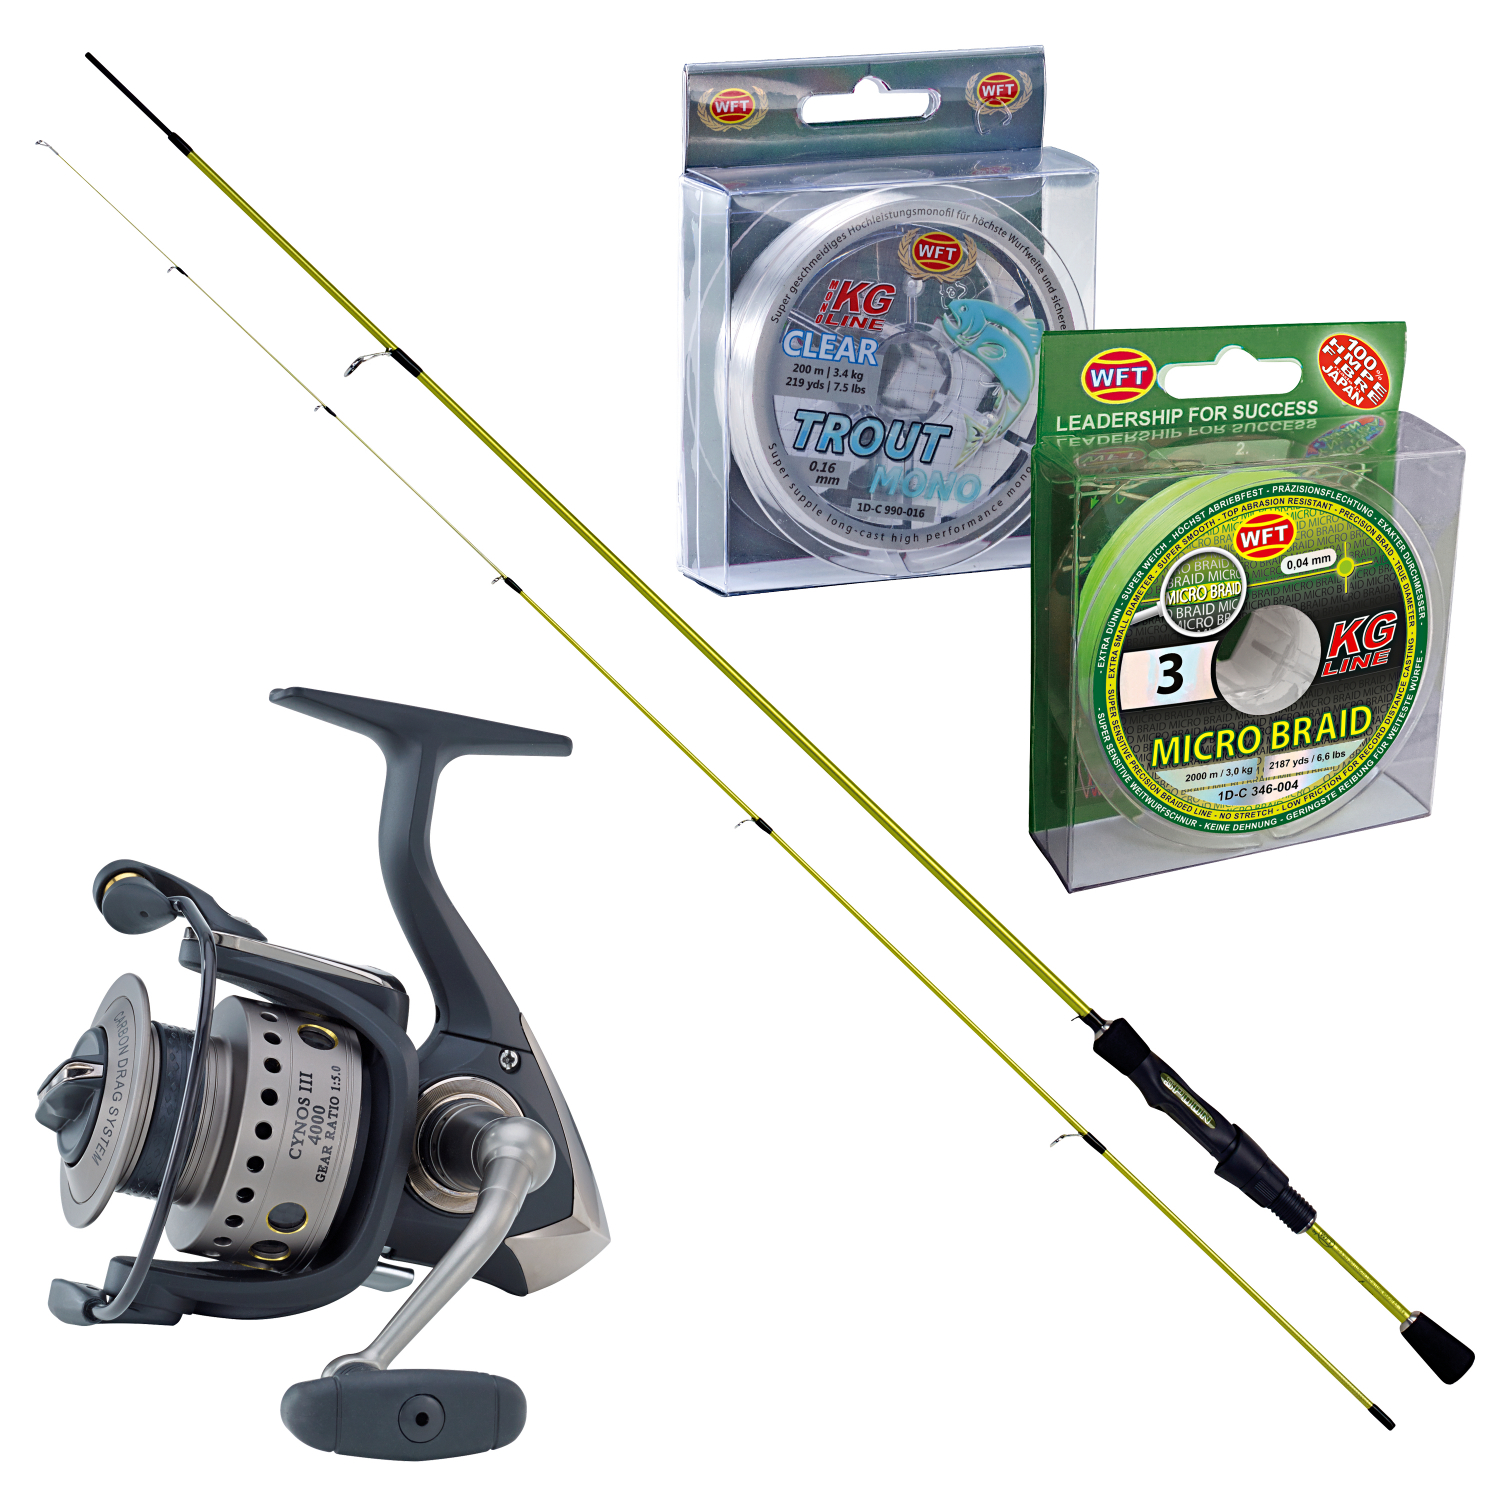 WFT Complete set (rod, reel, lines) at low prices